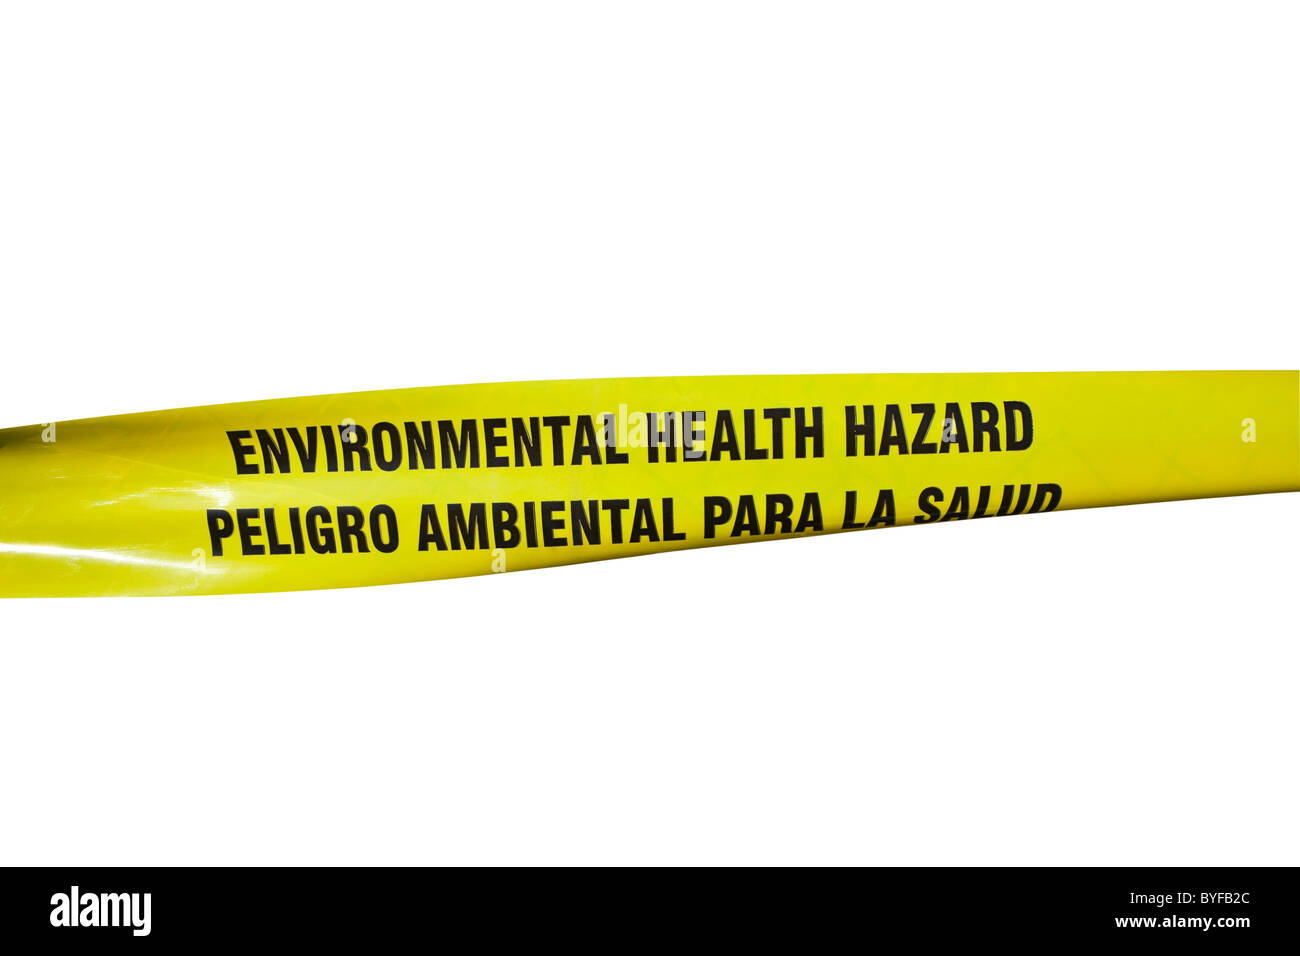 Environmental Health Hazard warning tape on a chain link fence. Stock Photo